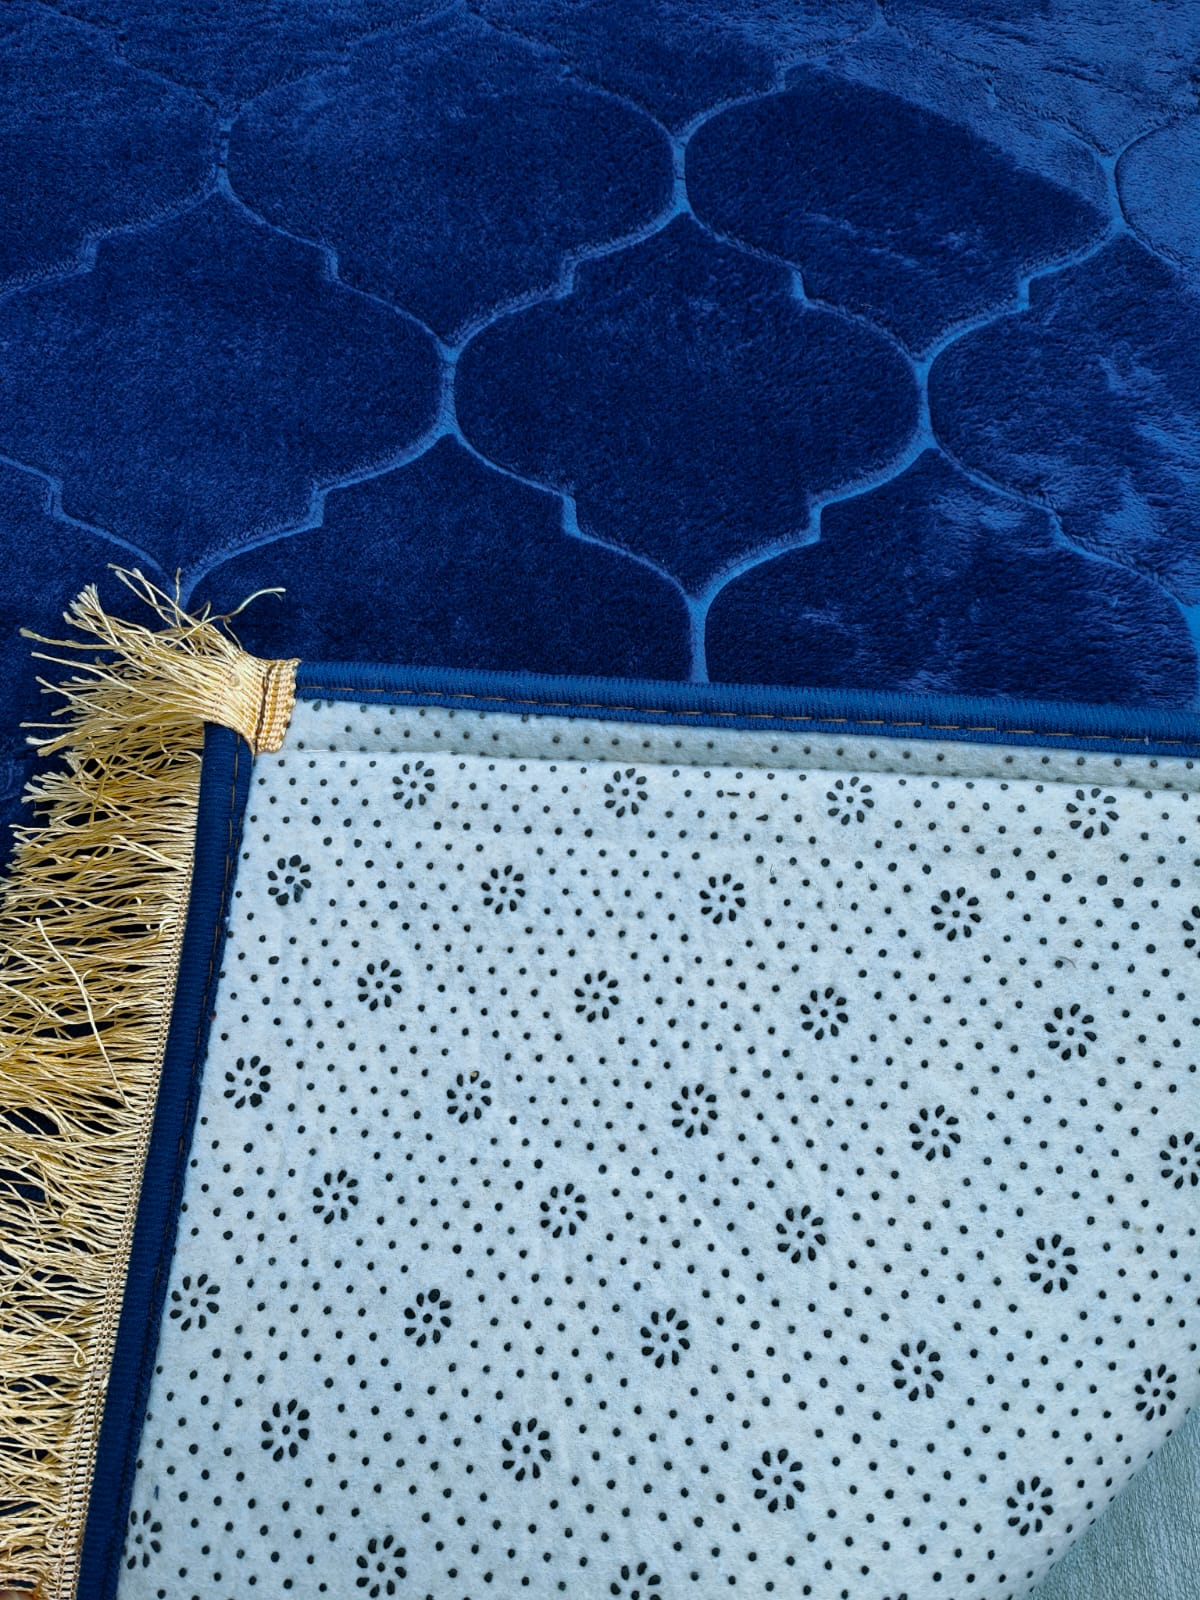 Discover the exquisite Royal Blue Padded Prayer Mat exclusively available at Hikmah Boutique. Experience unmatched comfort and quality at a reasonable price. Perfect for your daily prayers. Shop now!